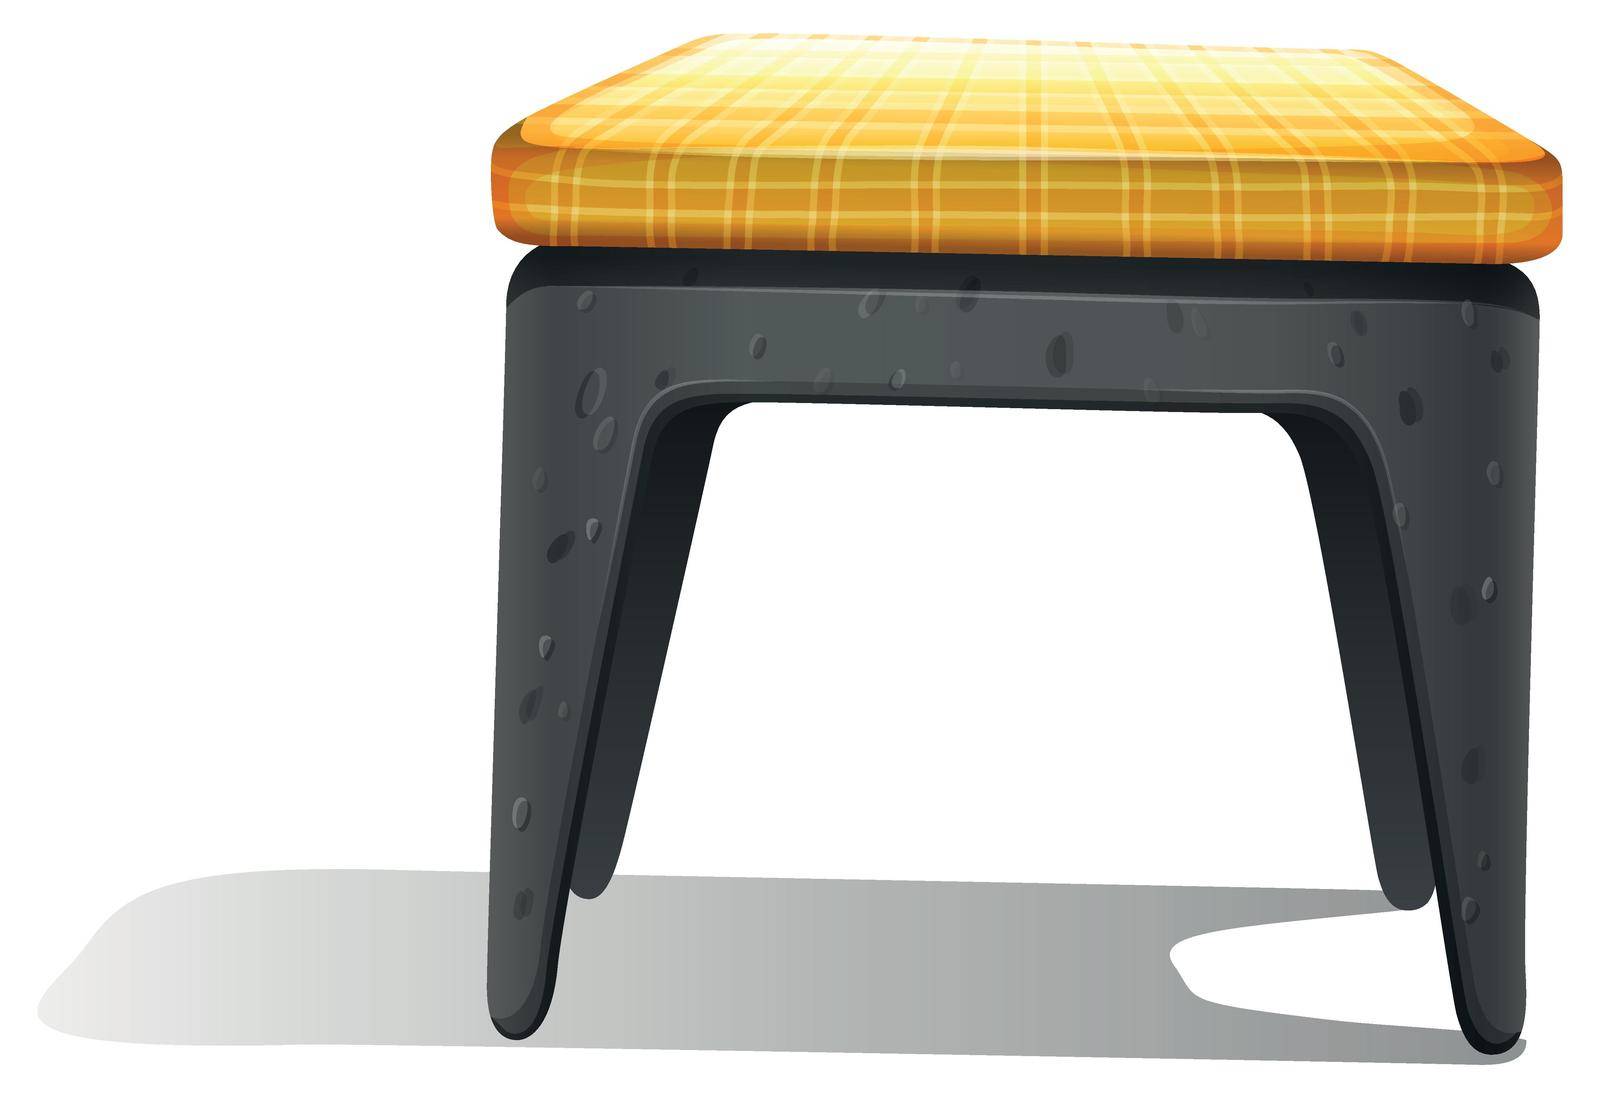 Illustration of a furniture on a white background